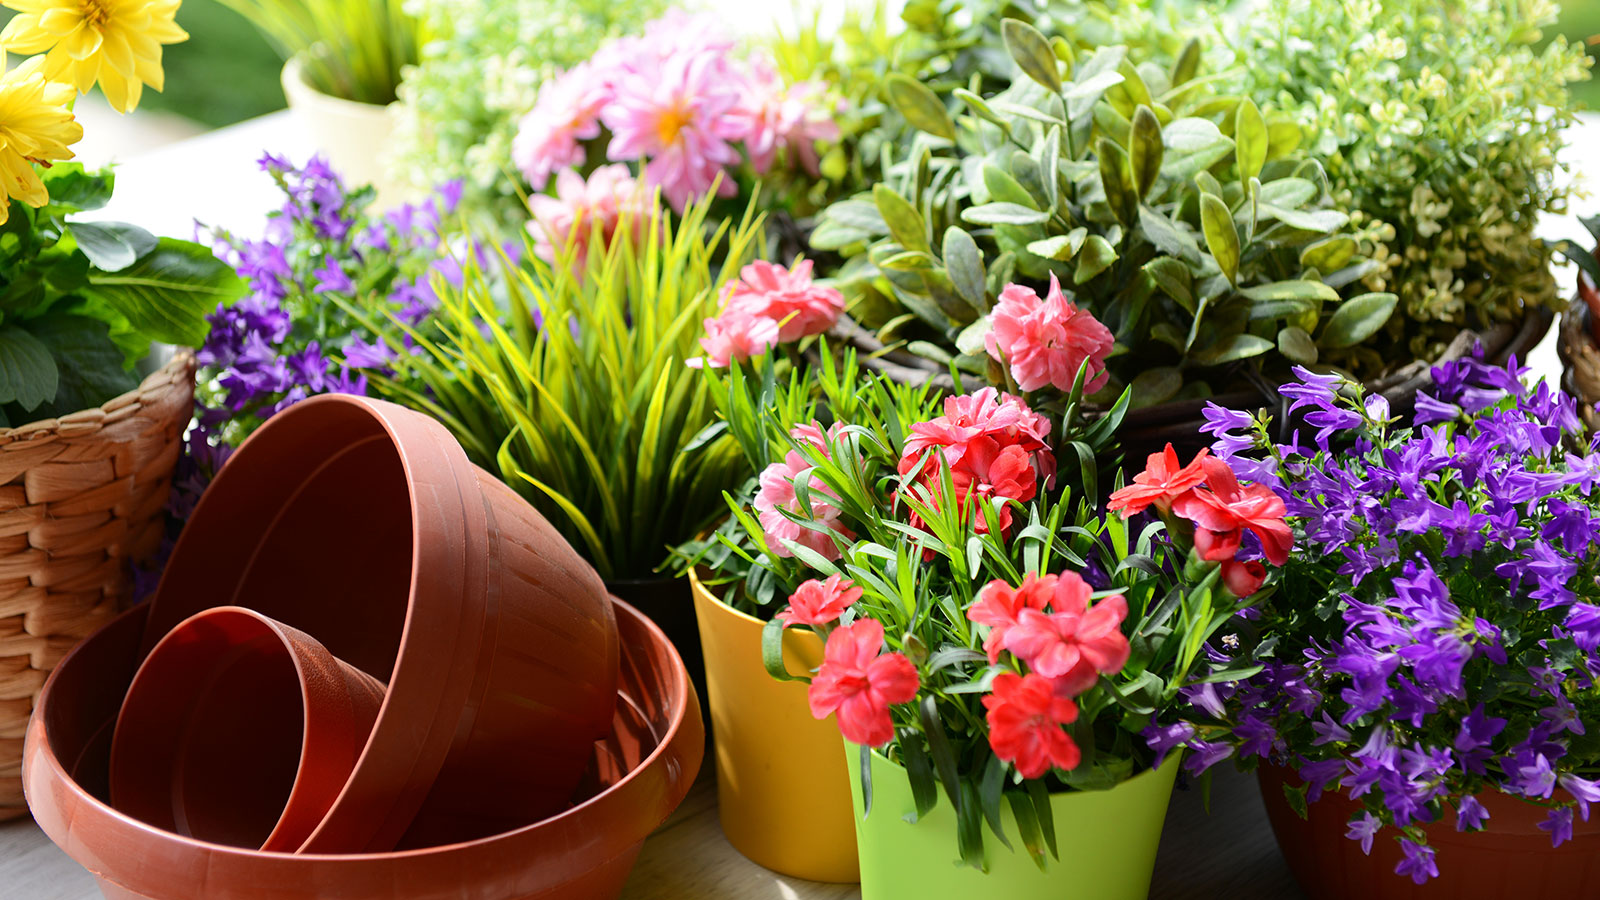 How to Clean Garden Pots and Containers